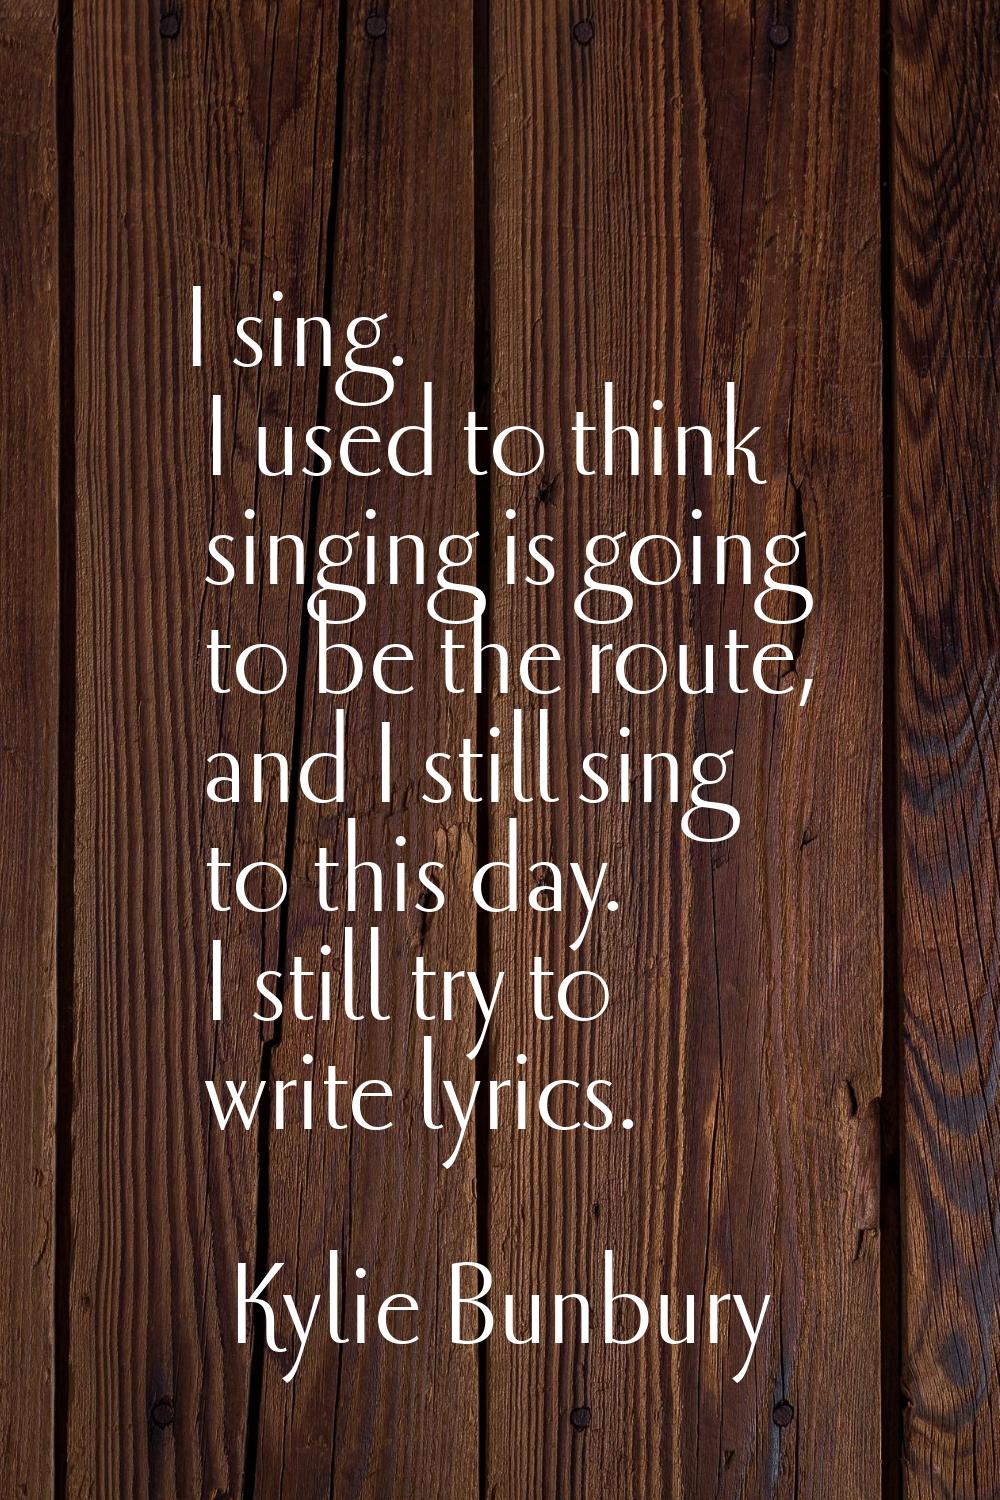 I sing. I used to think singing is going to be the route, and I still sing to this day. I still try